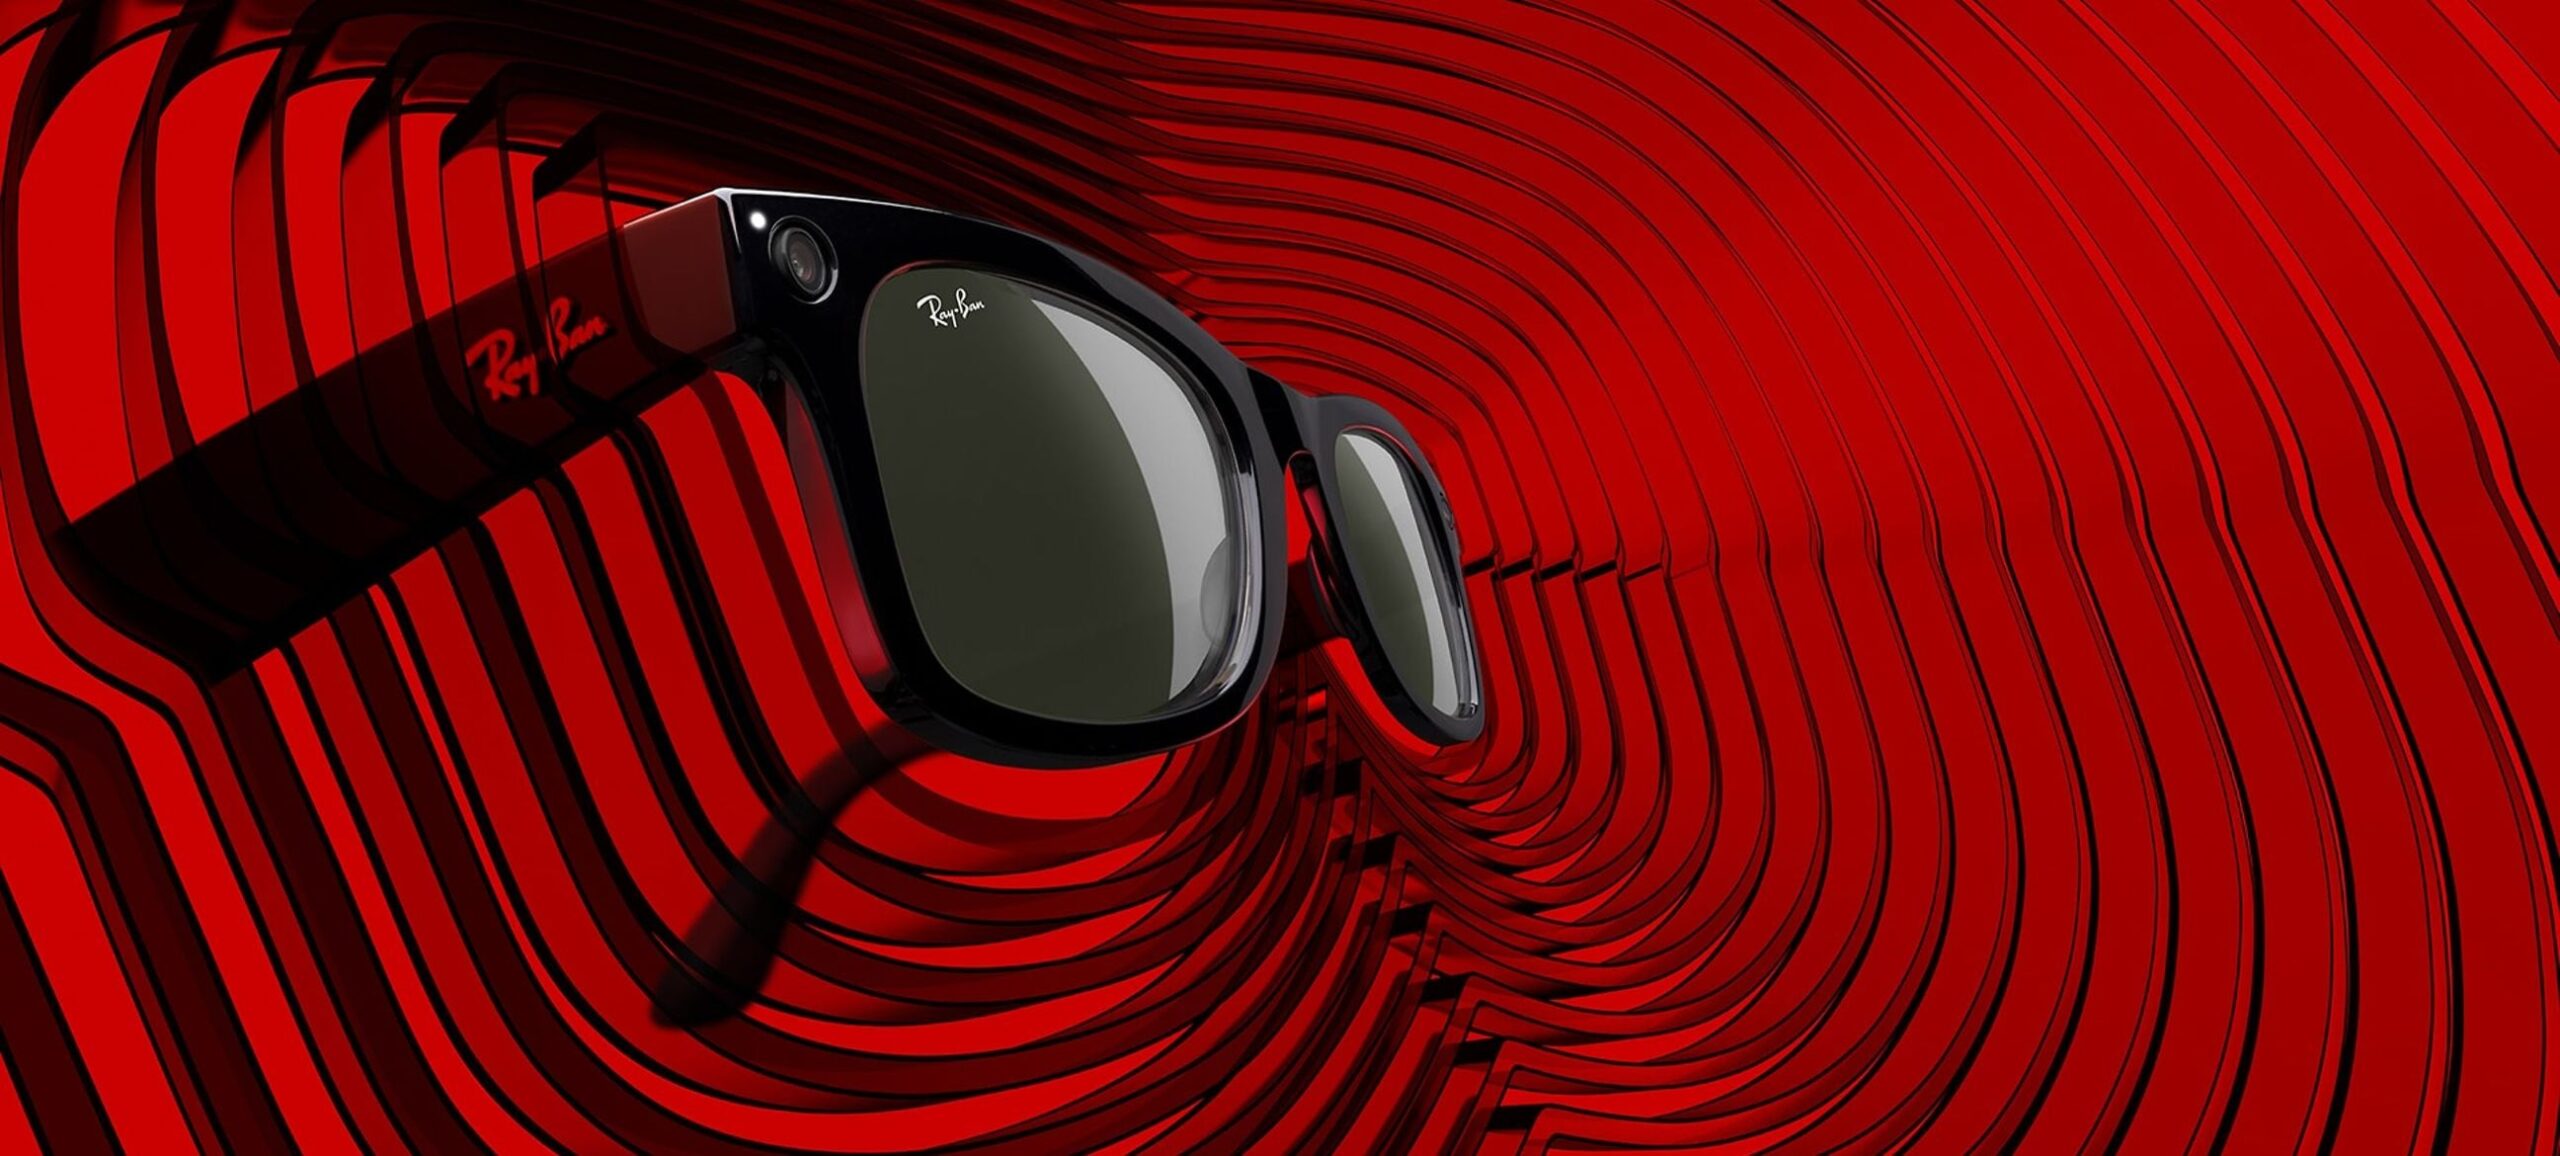 Facebook reveals Ray-Ban Stories smartglasses - The Ghost Howls